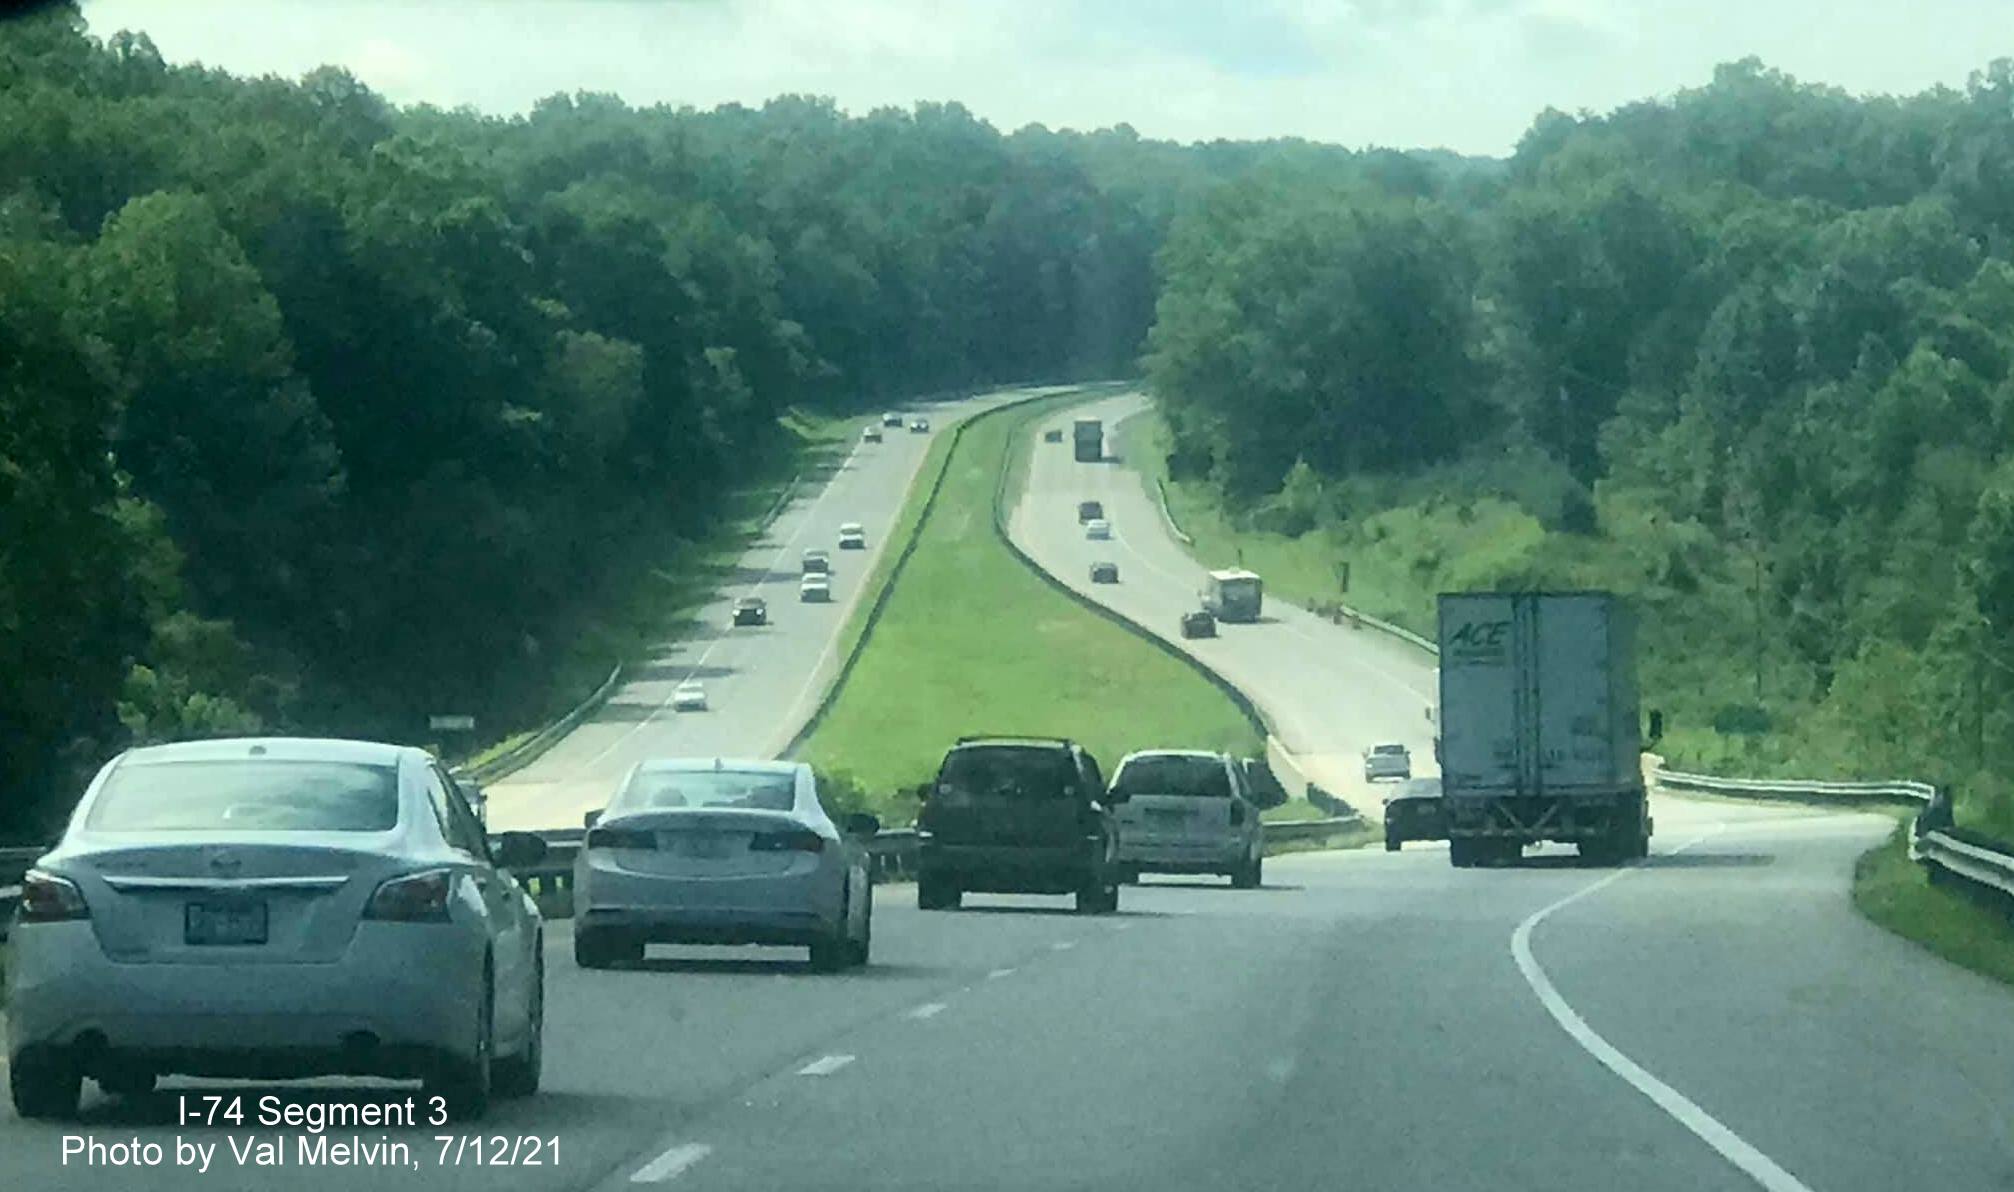 Image of traffic on US 52 South (Future I-74 East) in Surry County, by Val Melvin, July 2021